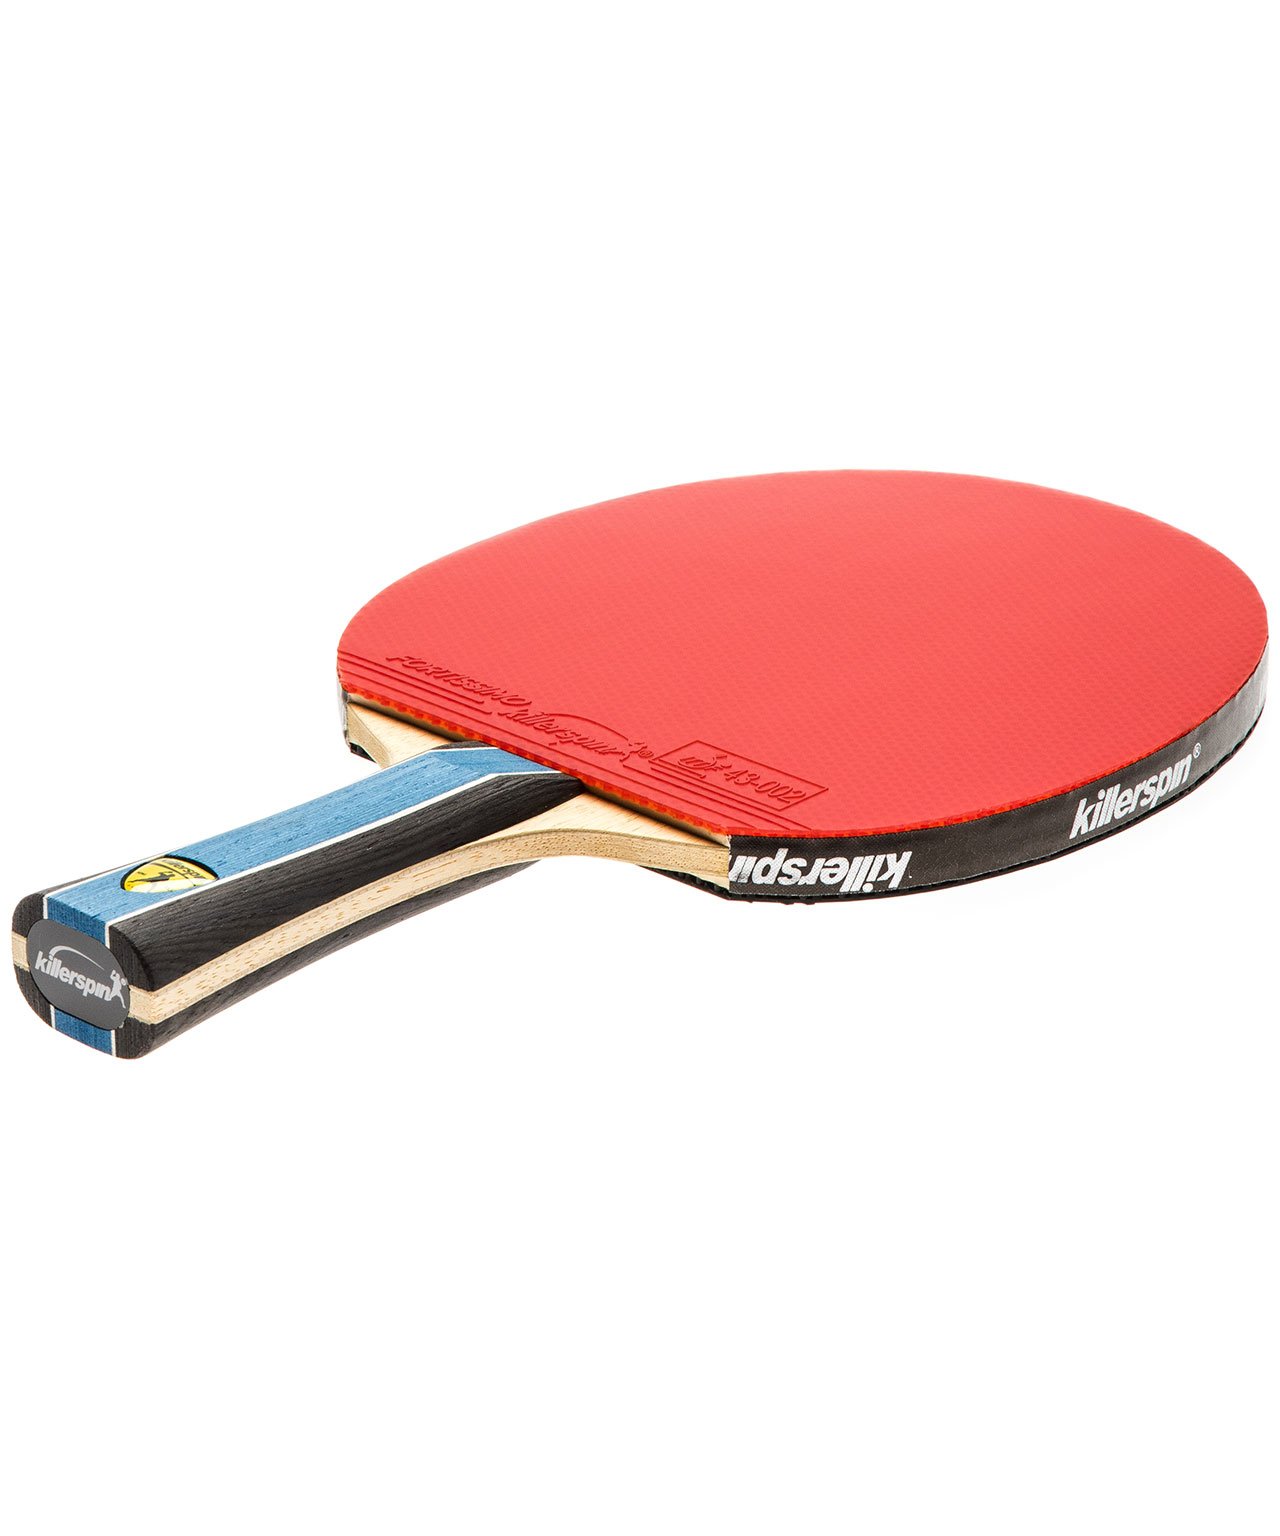 Killerspin Ping Pong Paddle Kido 5A RTG Premium - Flared Red Rubber